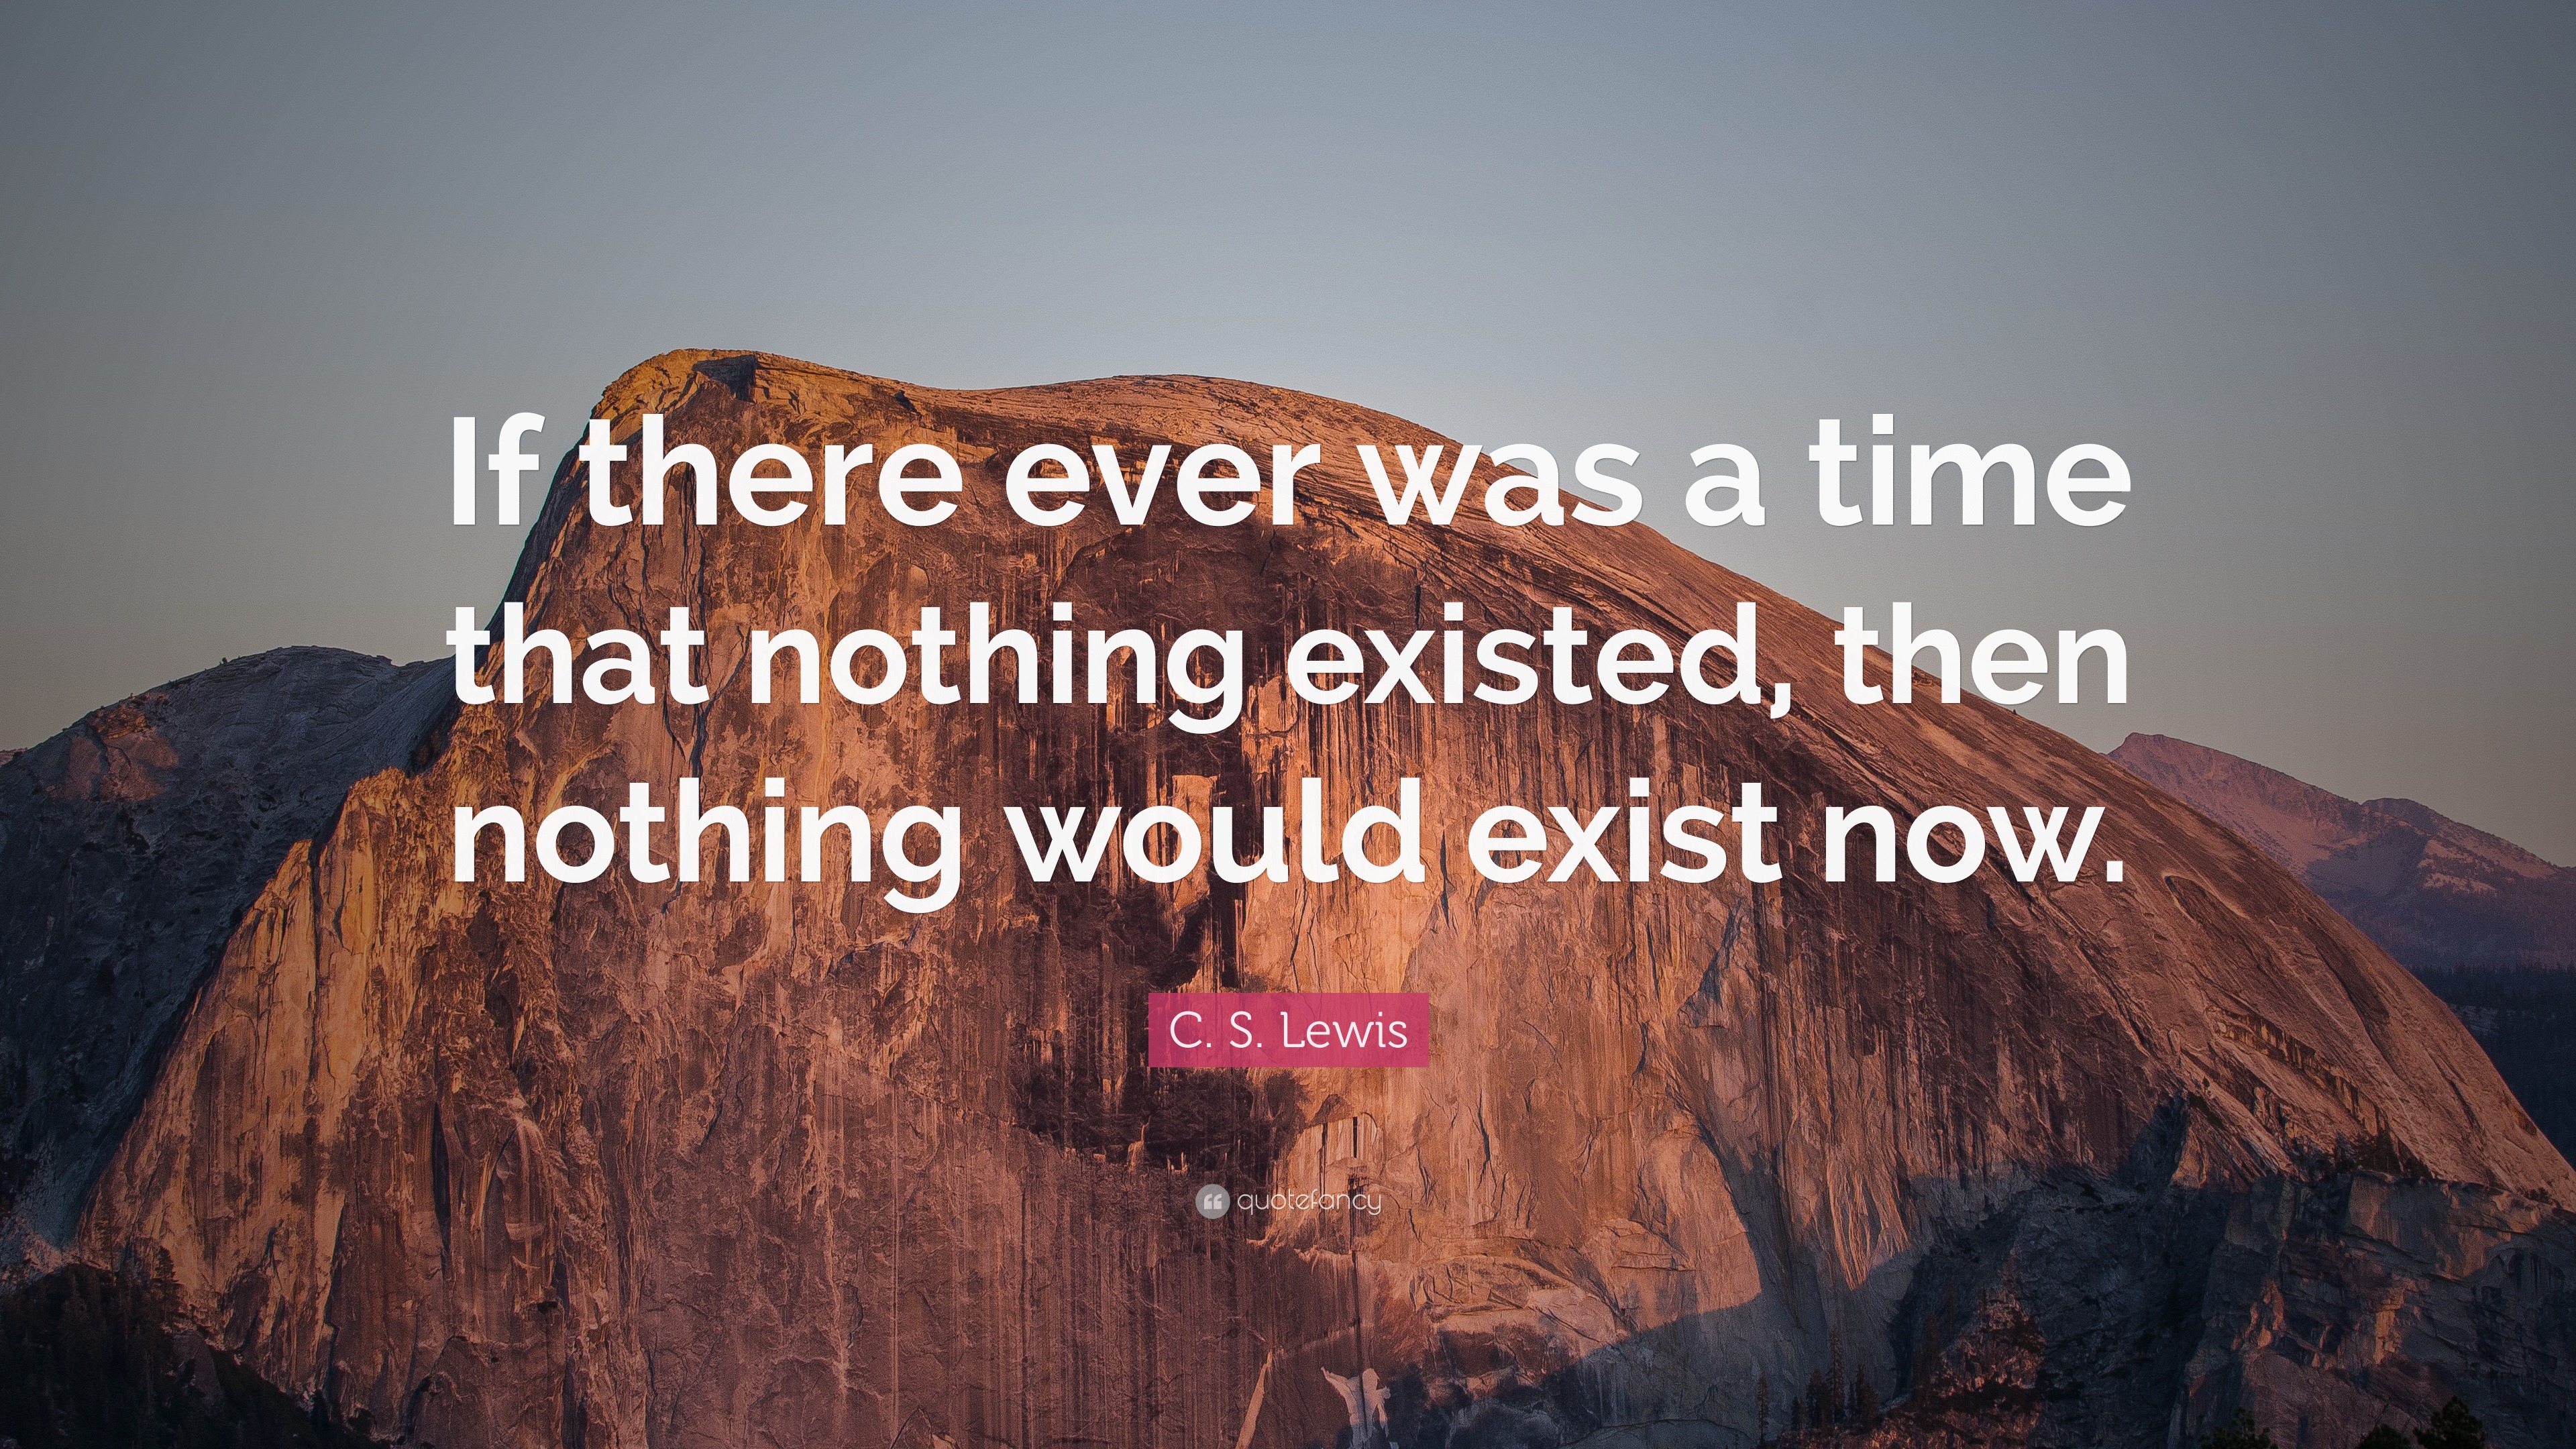 C. S. Lewis Quote: “If there ever was a time that nothing existed, then